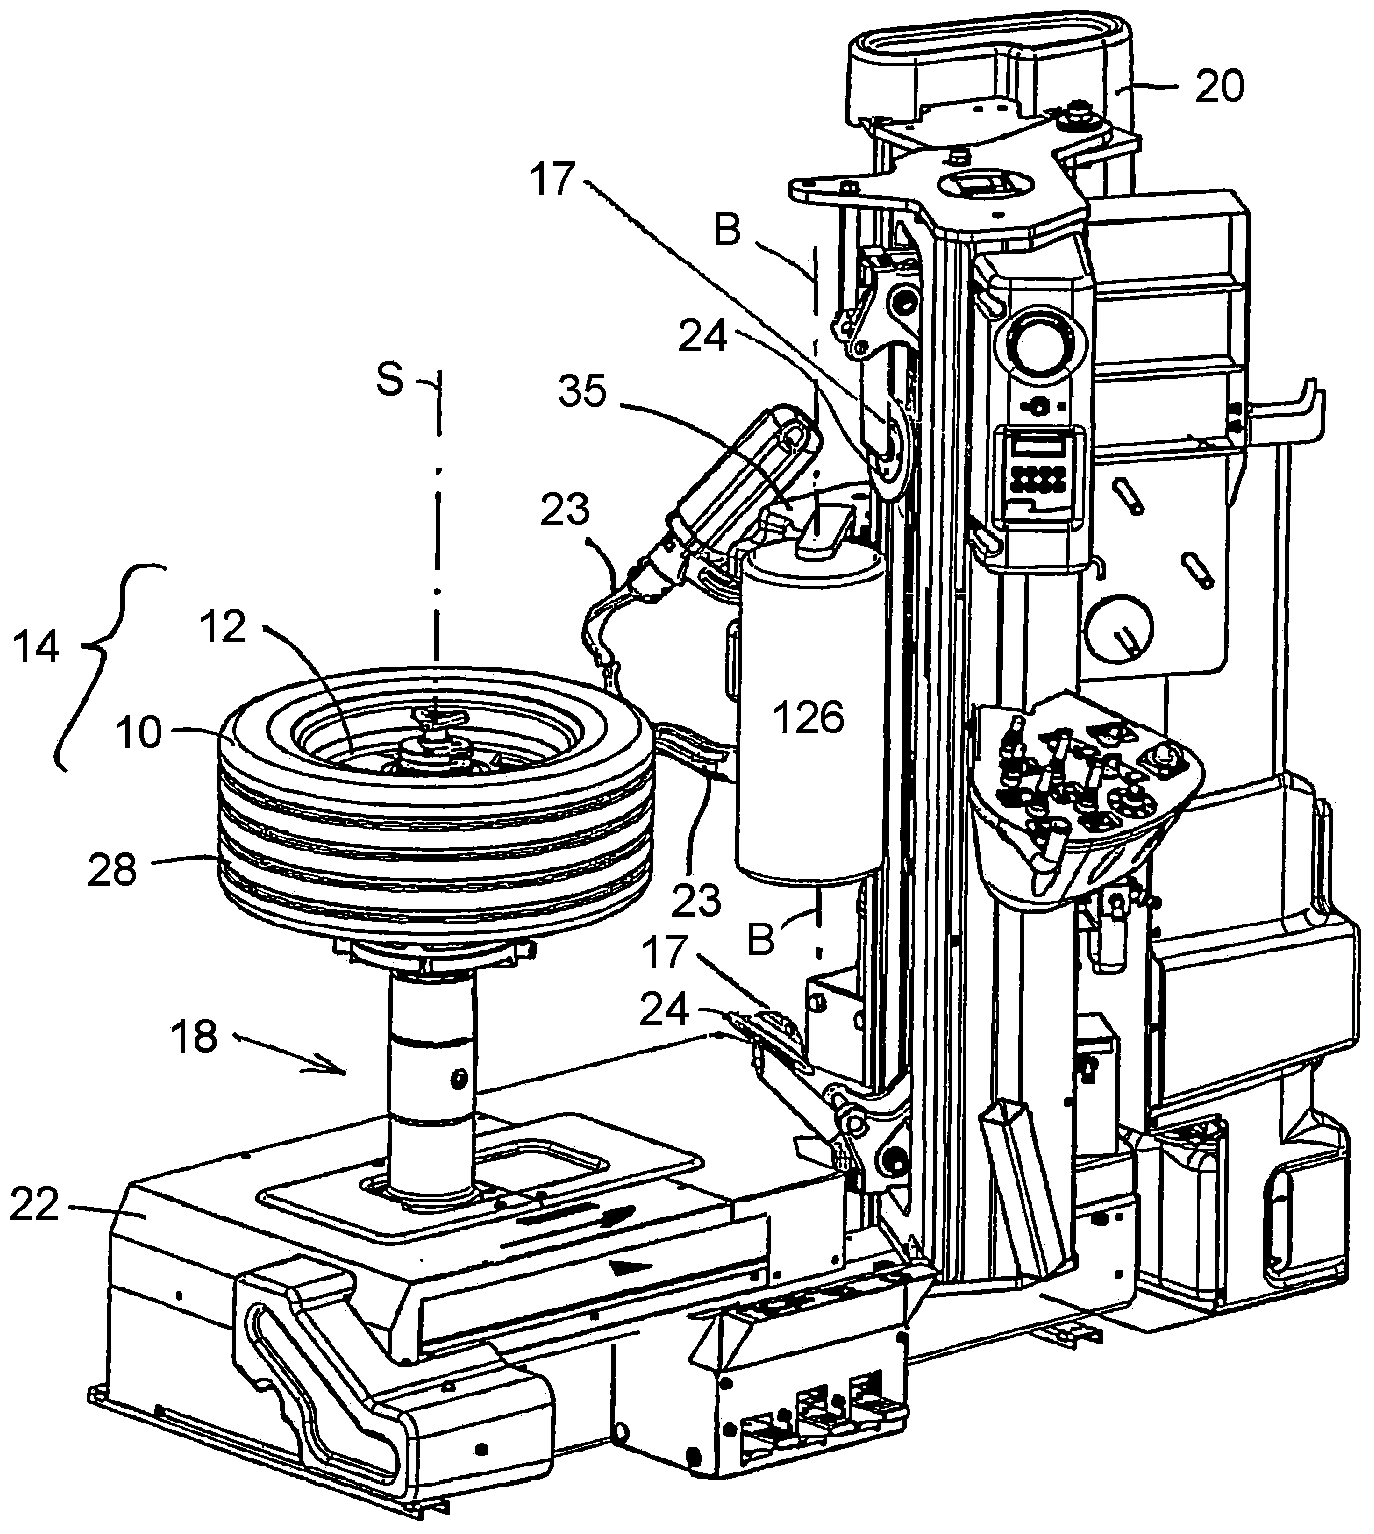 Automotive shop service apparatus having means for determining the rolling resistance coefficient of a tyre